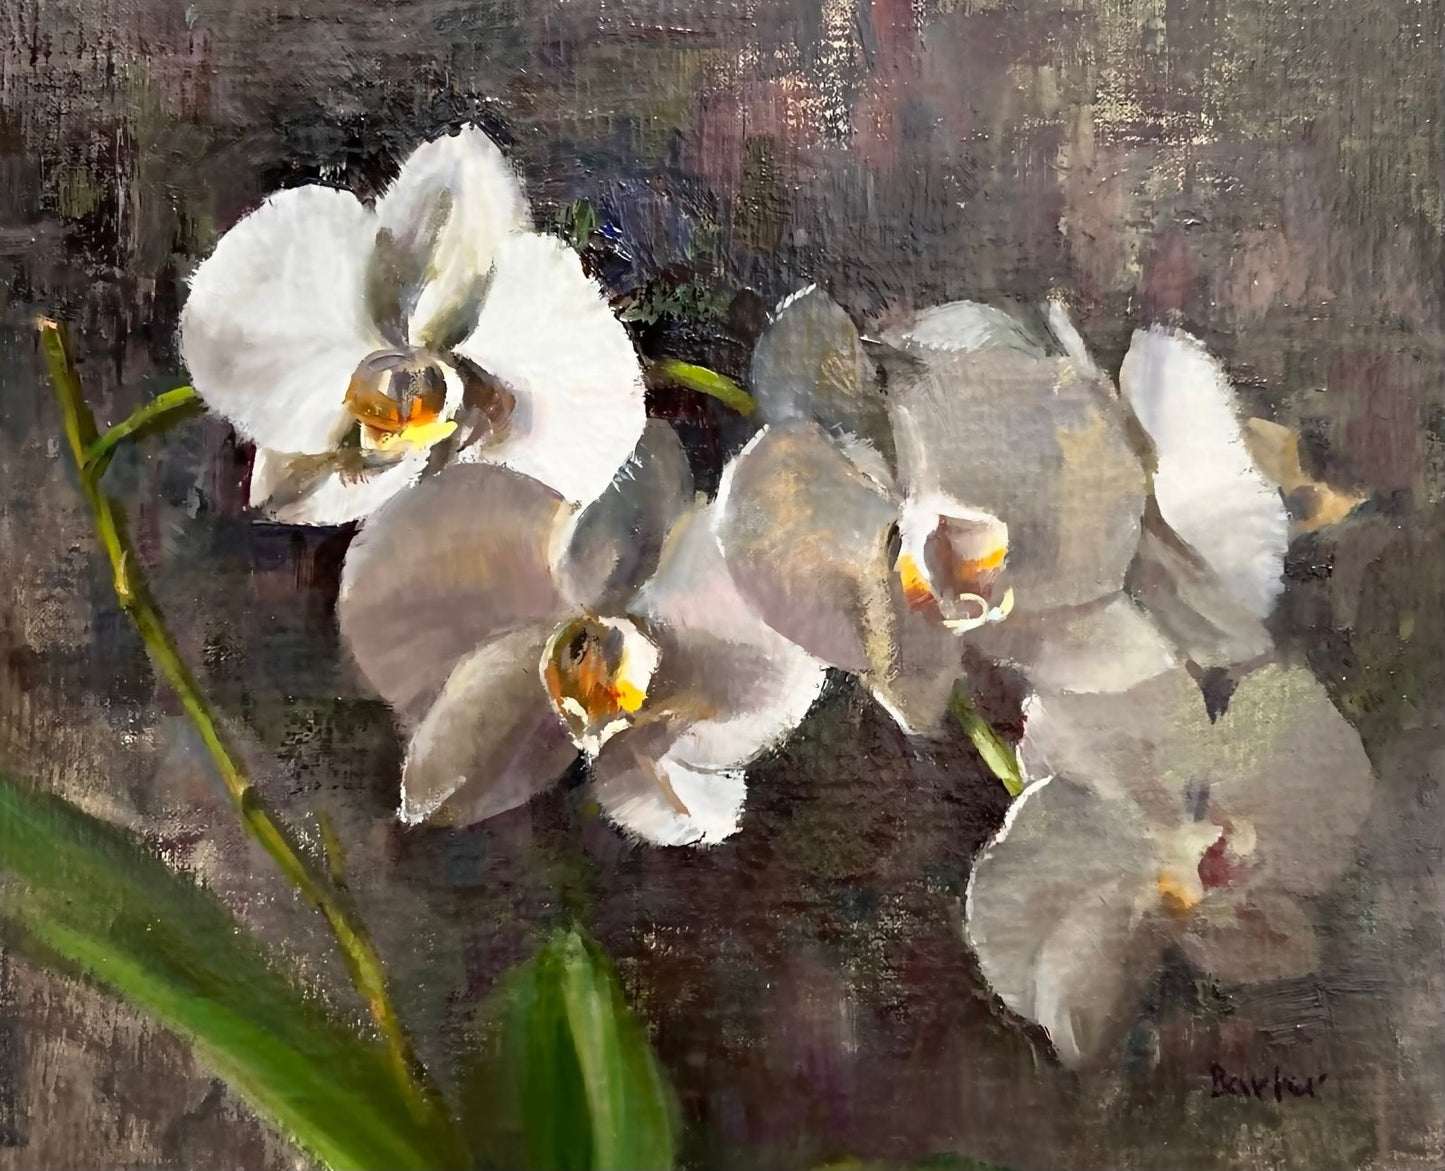 Second Time to Bloom by Stacy Barter at LePrince Galleries